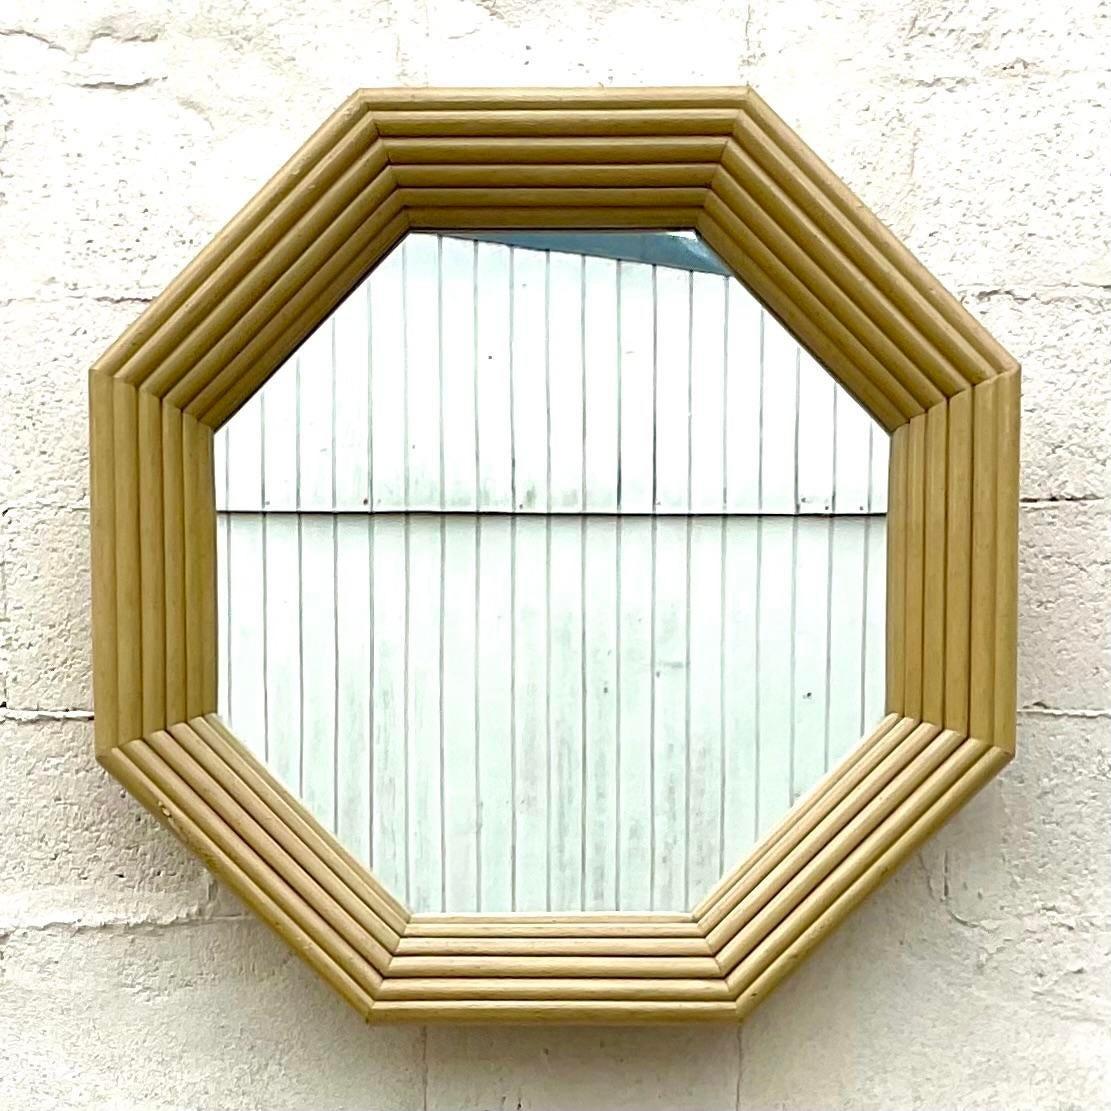 A fabulous vintage Coastal wall mirror. A chic rattan frame in an Octagonal shape. Acquired from a Palm Beach estate.